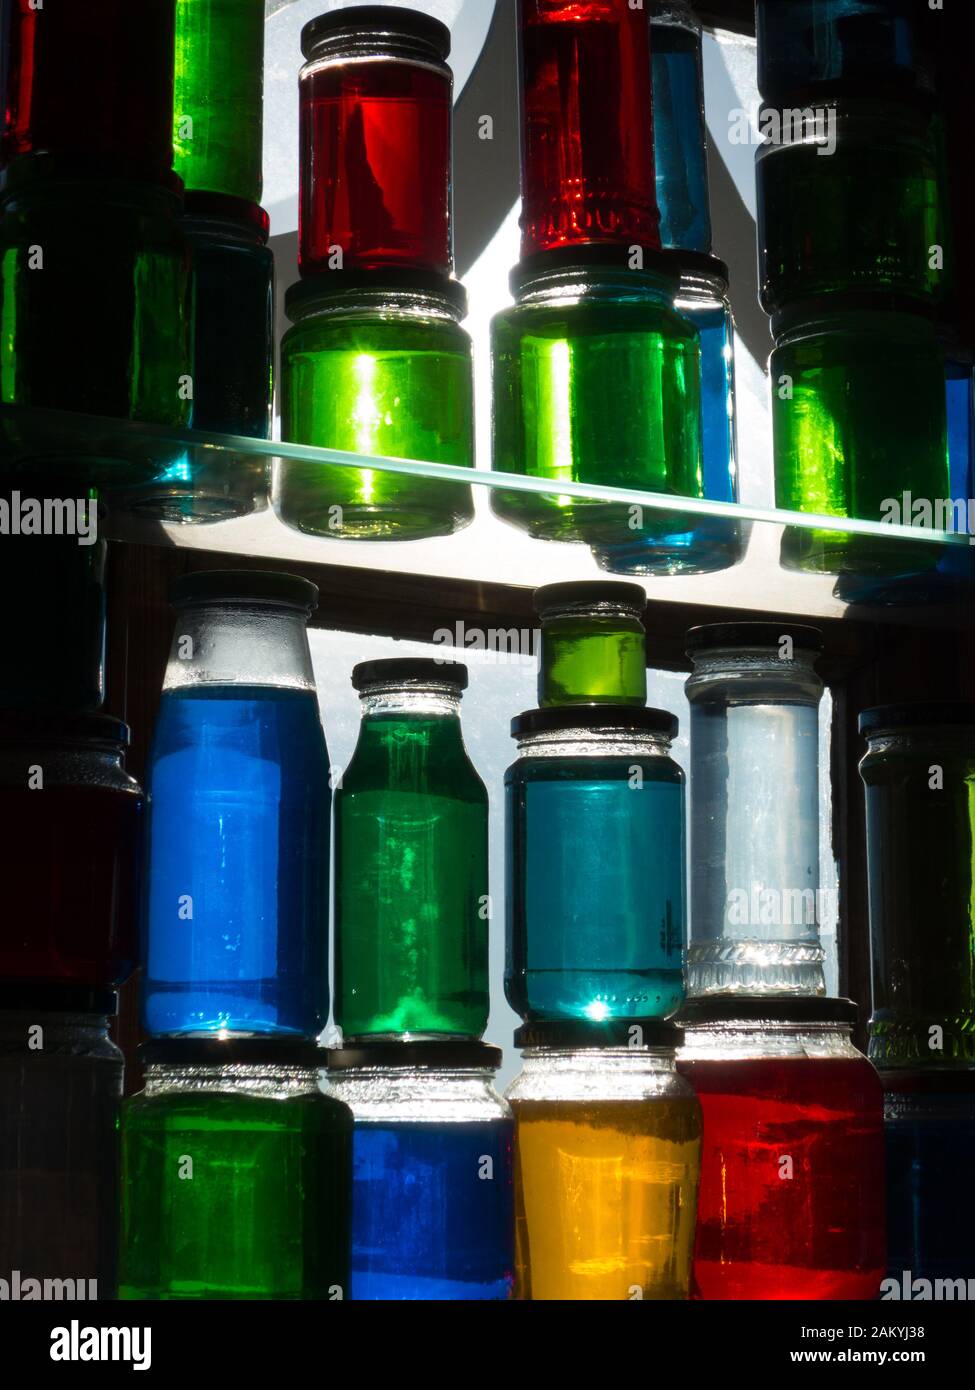 Traditional icelandic window decoration with shining jars filled with colored water. Shot against sunlight with whole array of colors visible. Stock Photo